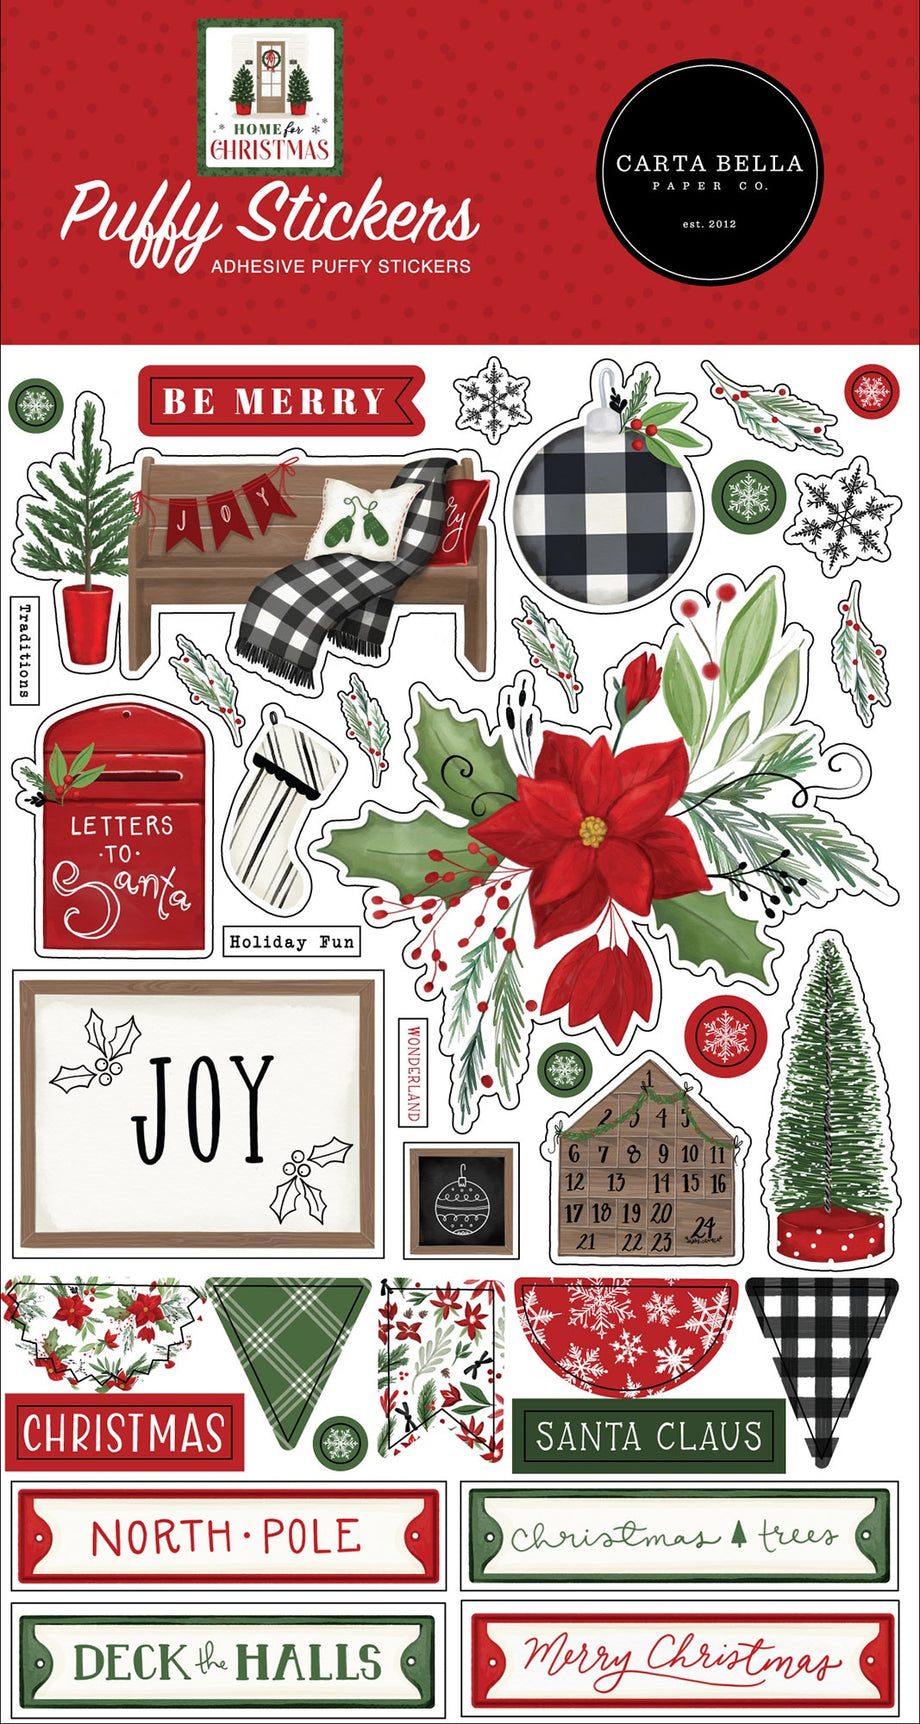 Carta Bella - Home for Christmas Puffy Stickers